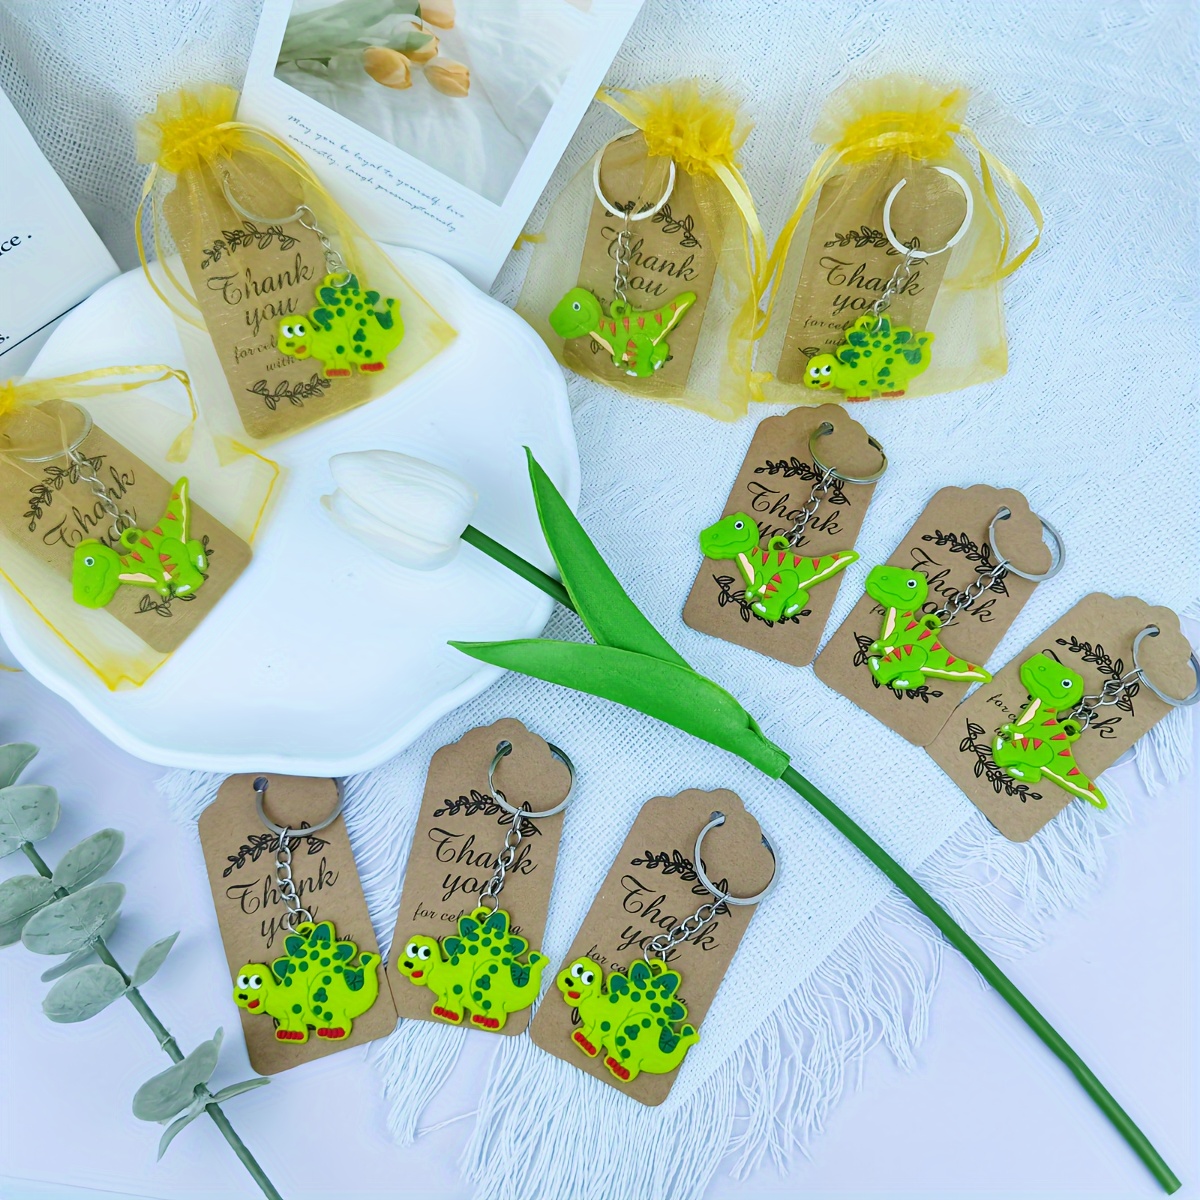 

30pcs, Dinosaur Keychains Party Favors Set Including 10 Dinosaur Key Chains 10 Golden Organza Bags 10 Thank You Kaf Tags For Party Supplies School Reward Birthday Wedding Couple Couple Gift Supplies